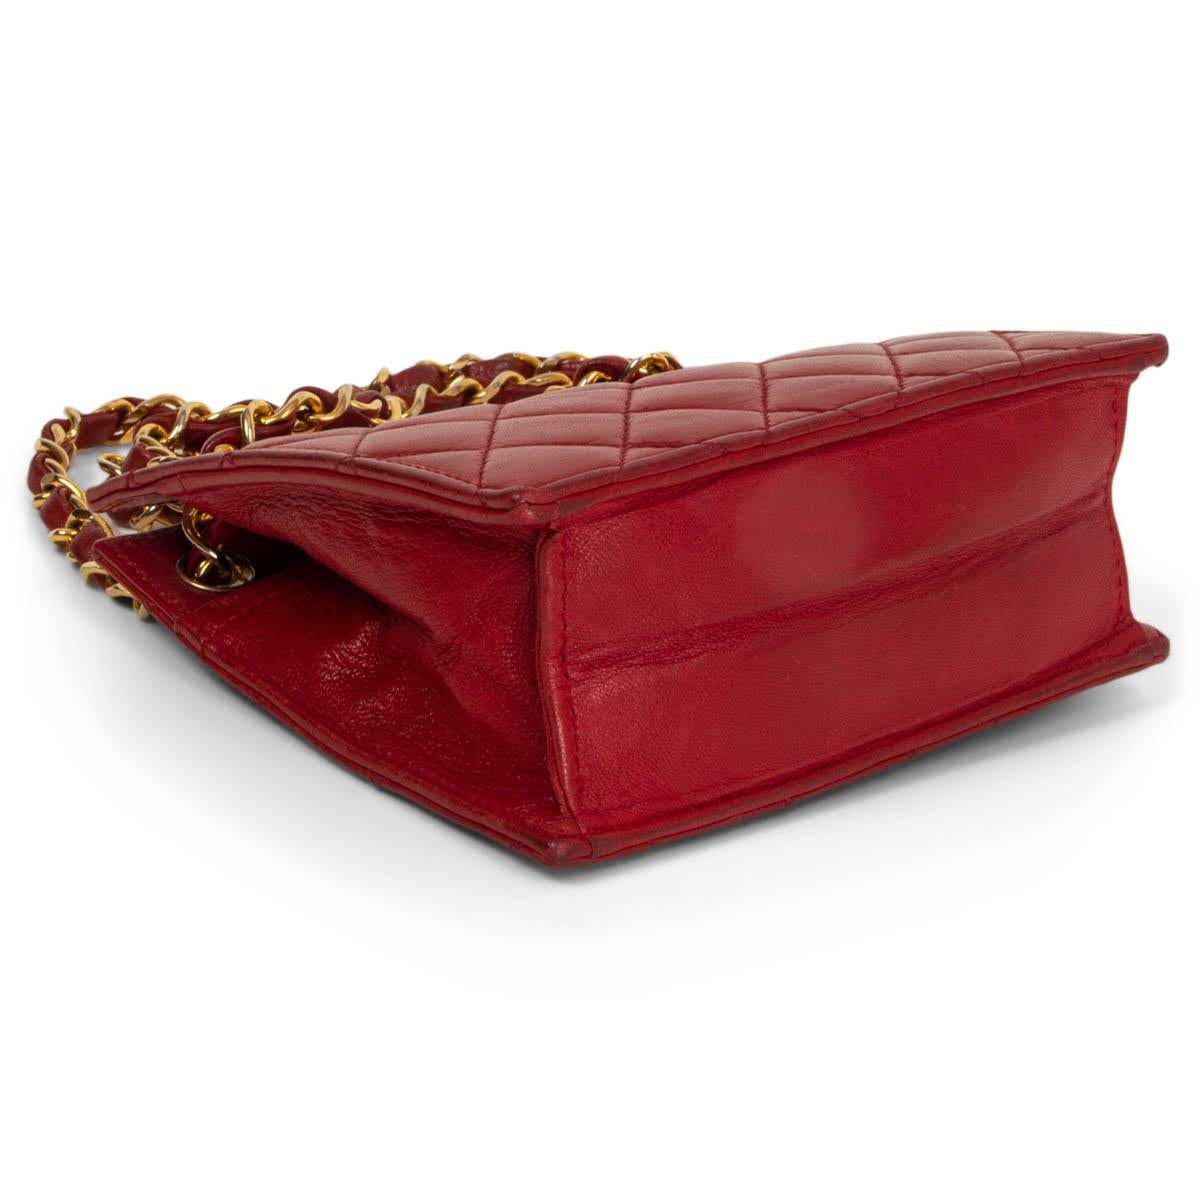 Women's CHANEL red quilted leather 1980's SQUARE MINI Shoulder Bag